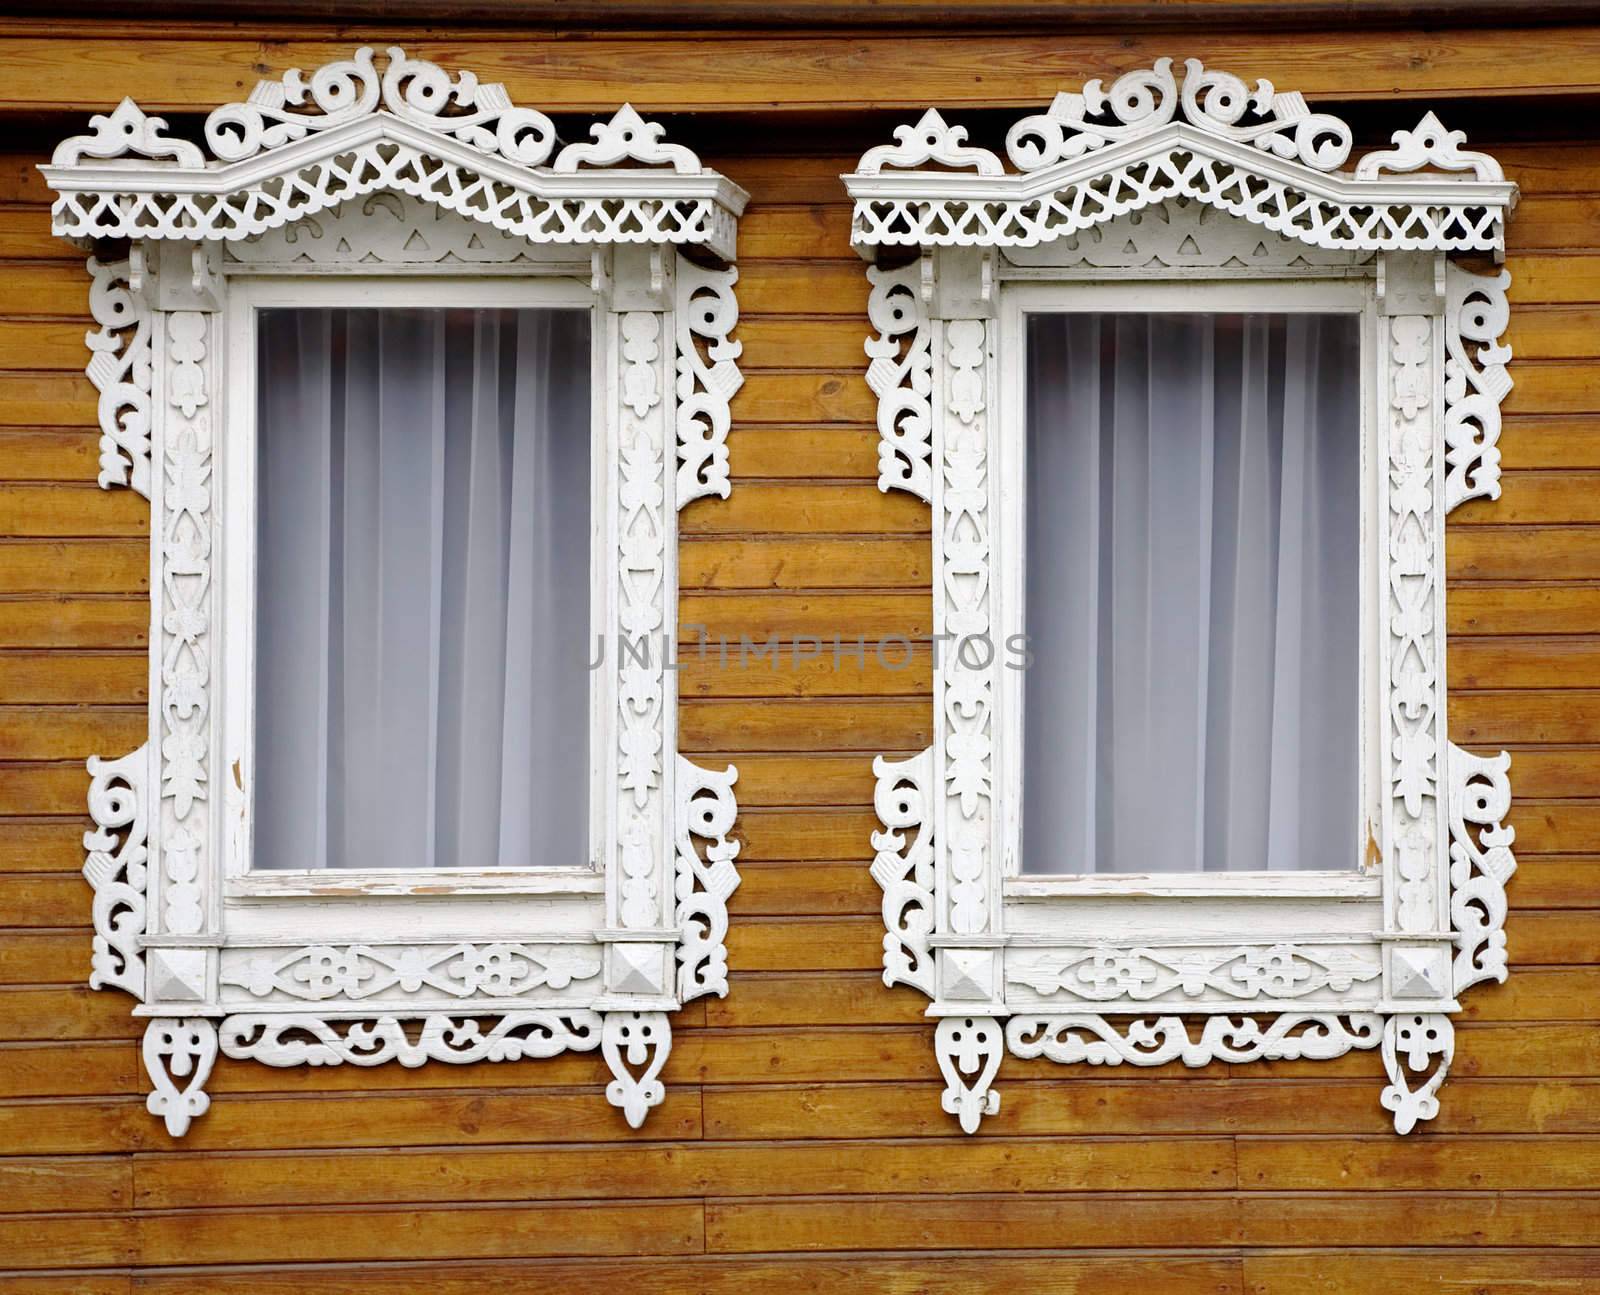 Two windows from old wooden yellow wall